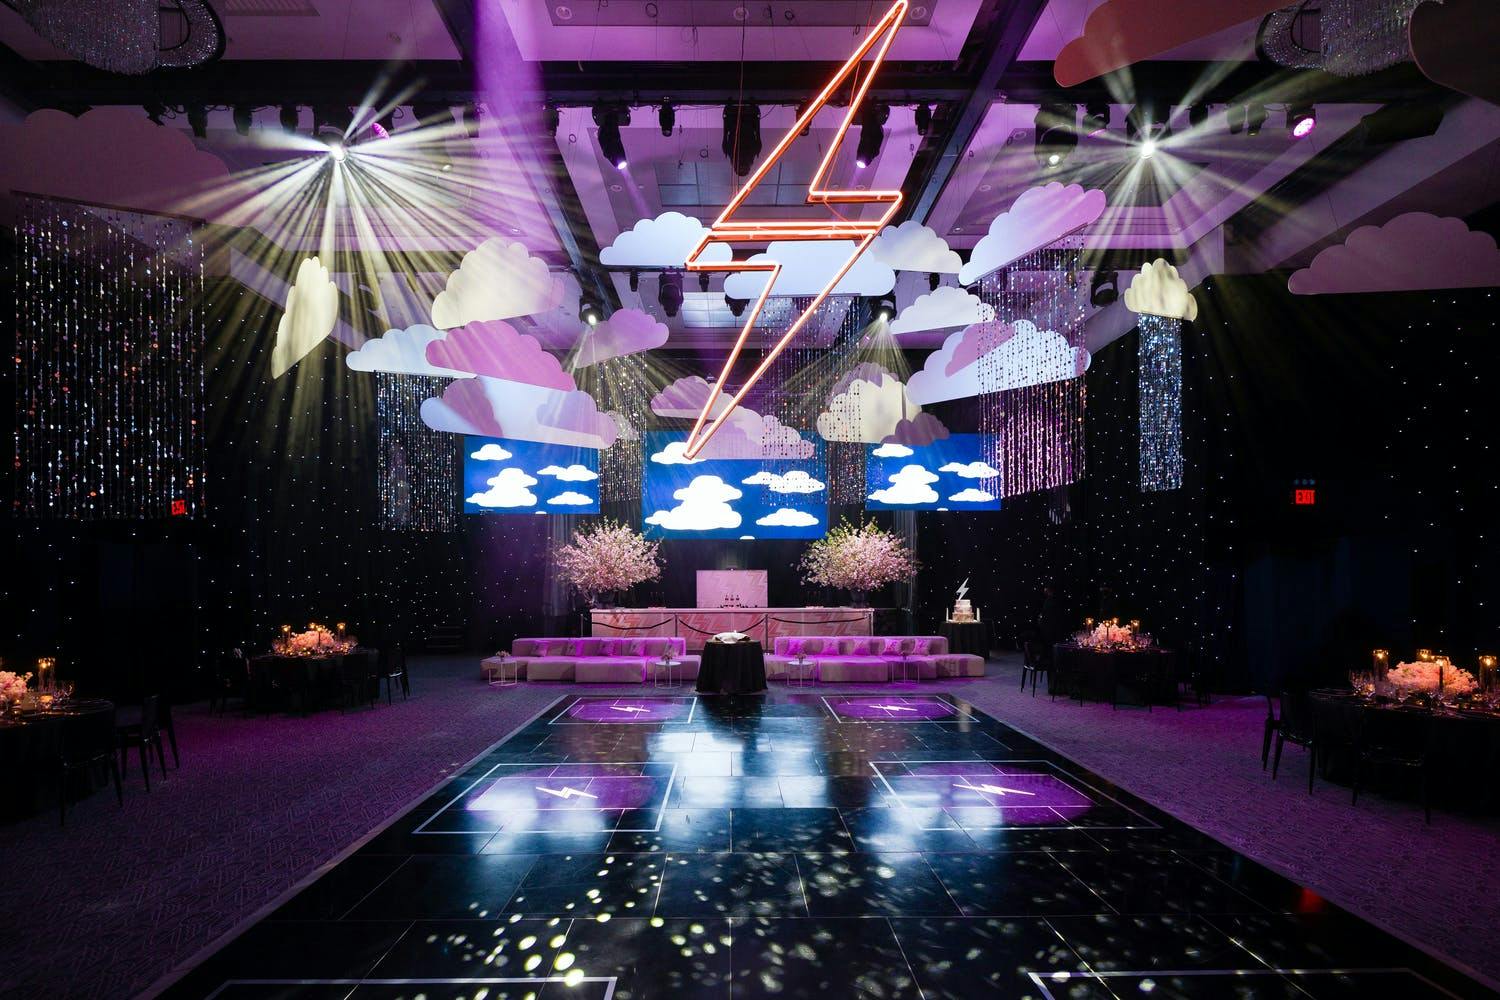 Thunderstorm Celebration with Lightniing Bolts and Thunder Clouds with Purple and Dark Colors and Dance Floor | PartySlate